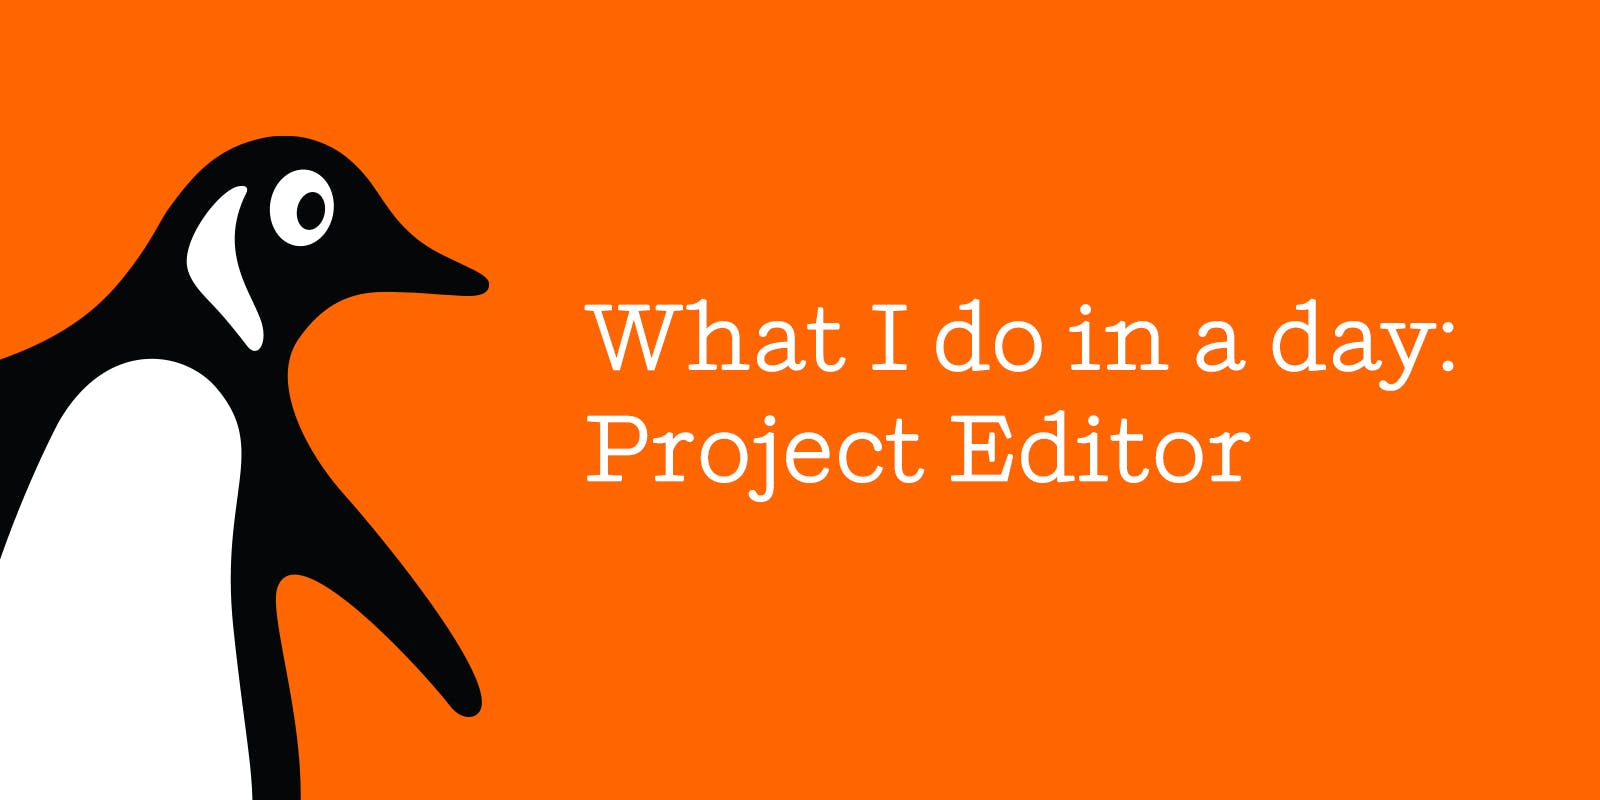 What I do in a day: Project Editor